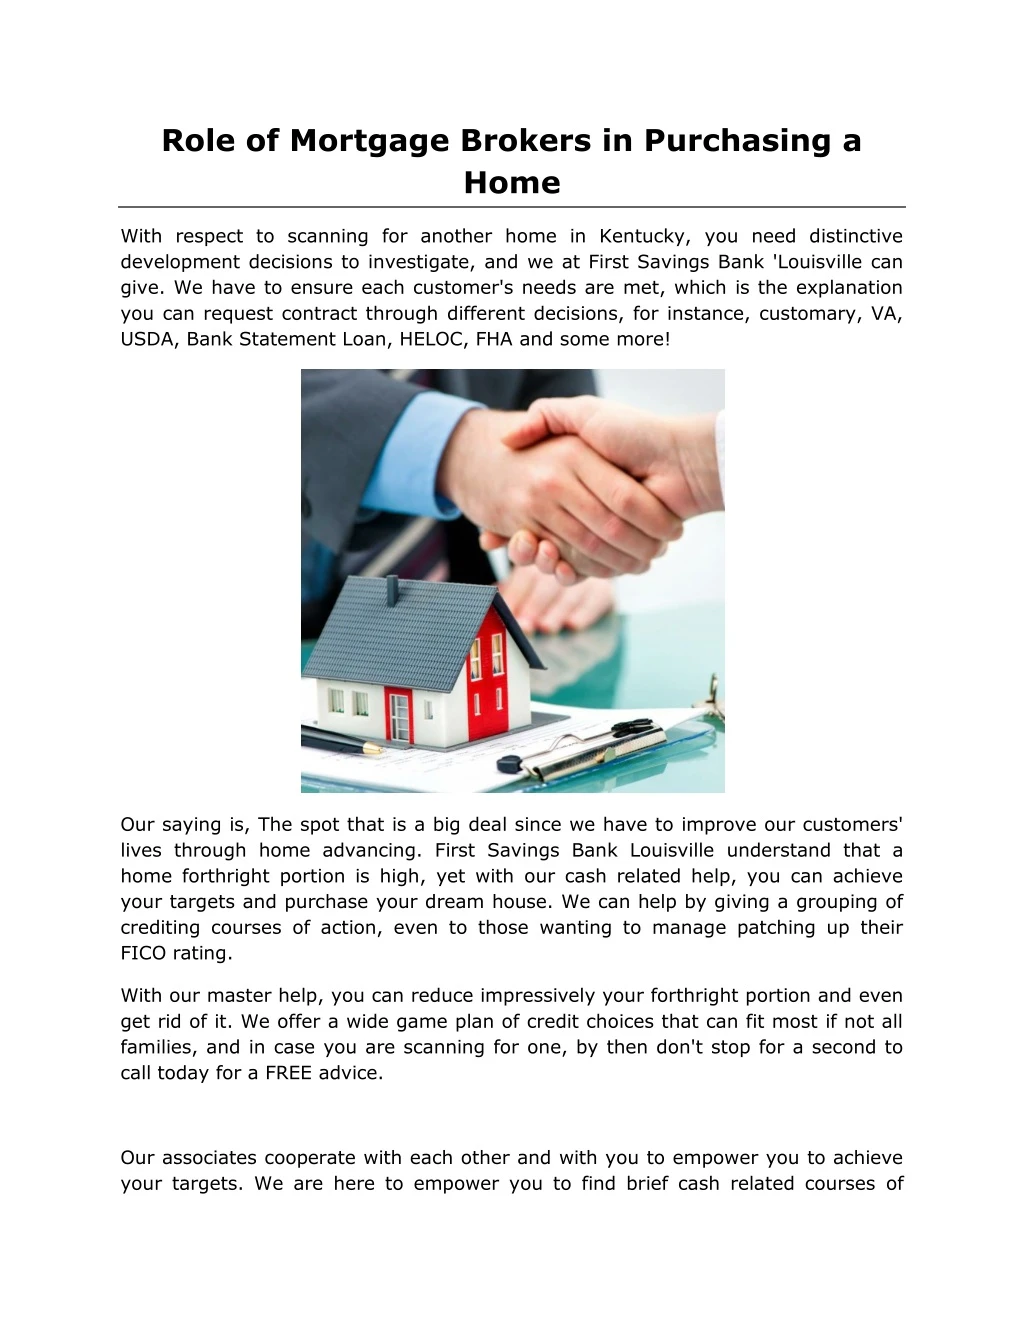 role of mortgage brokers in purchasing a home